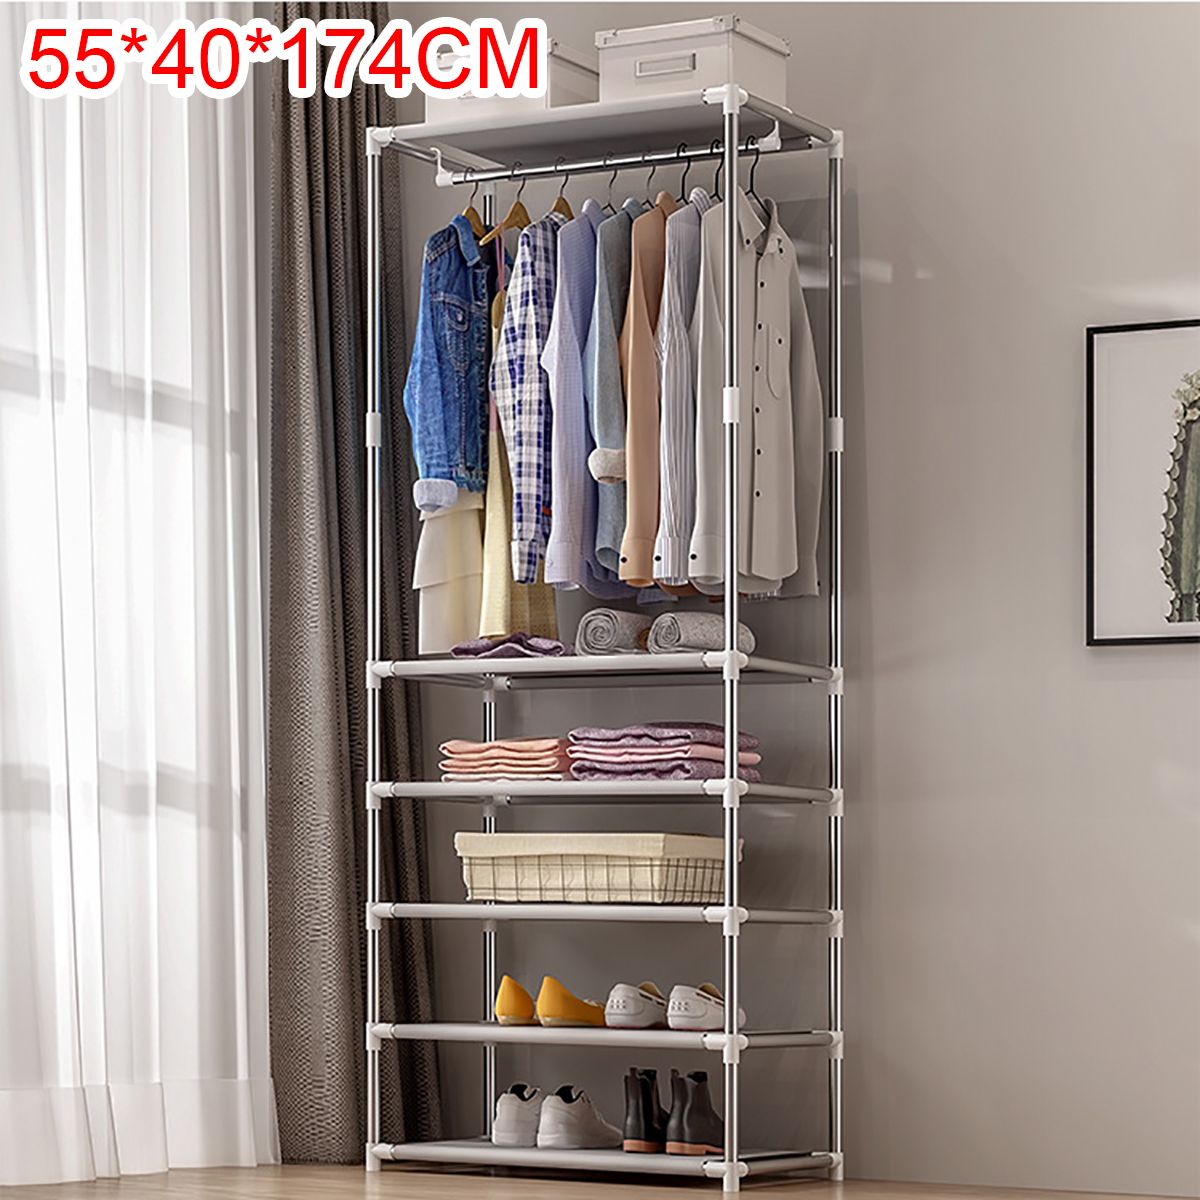 Simple Coat Rack Floor Clothes Hangers Creative Clothing Rack Shelf Easy Assembly Bedroom Hanging Clothing Racks Fashion Home Decorations 1